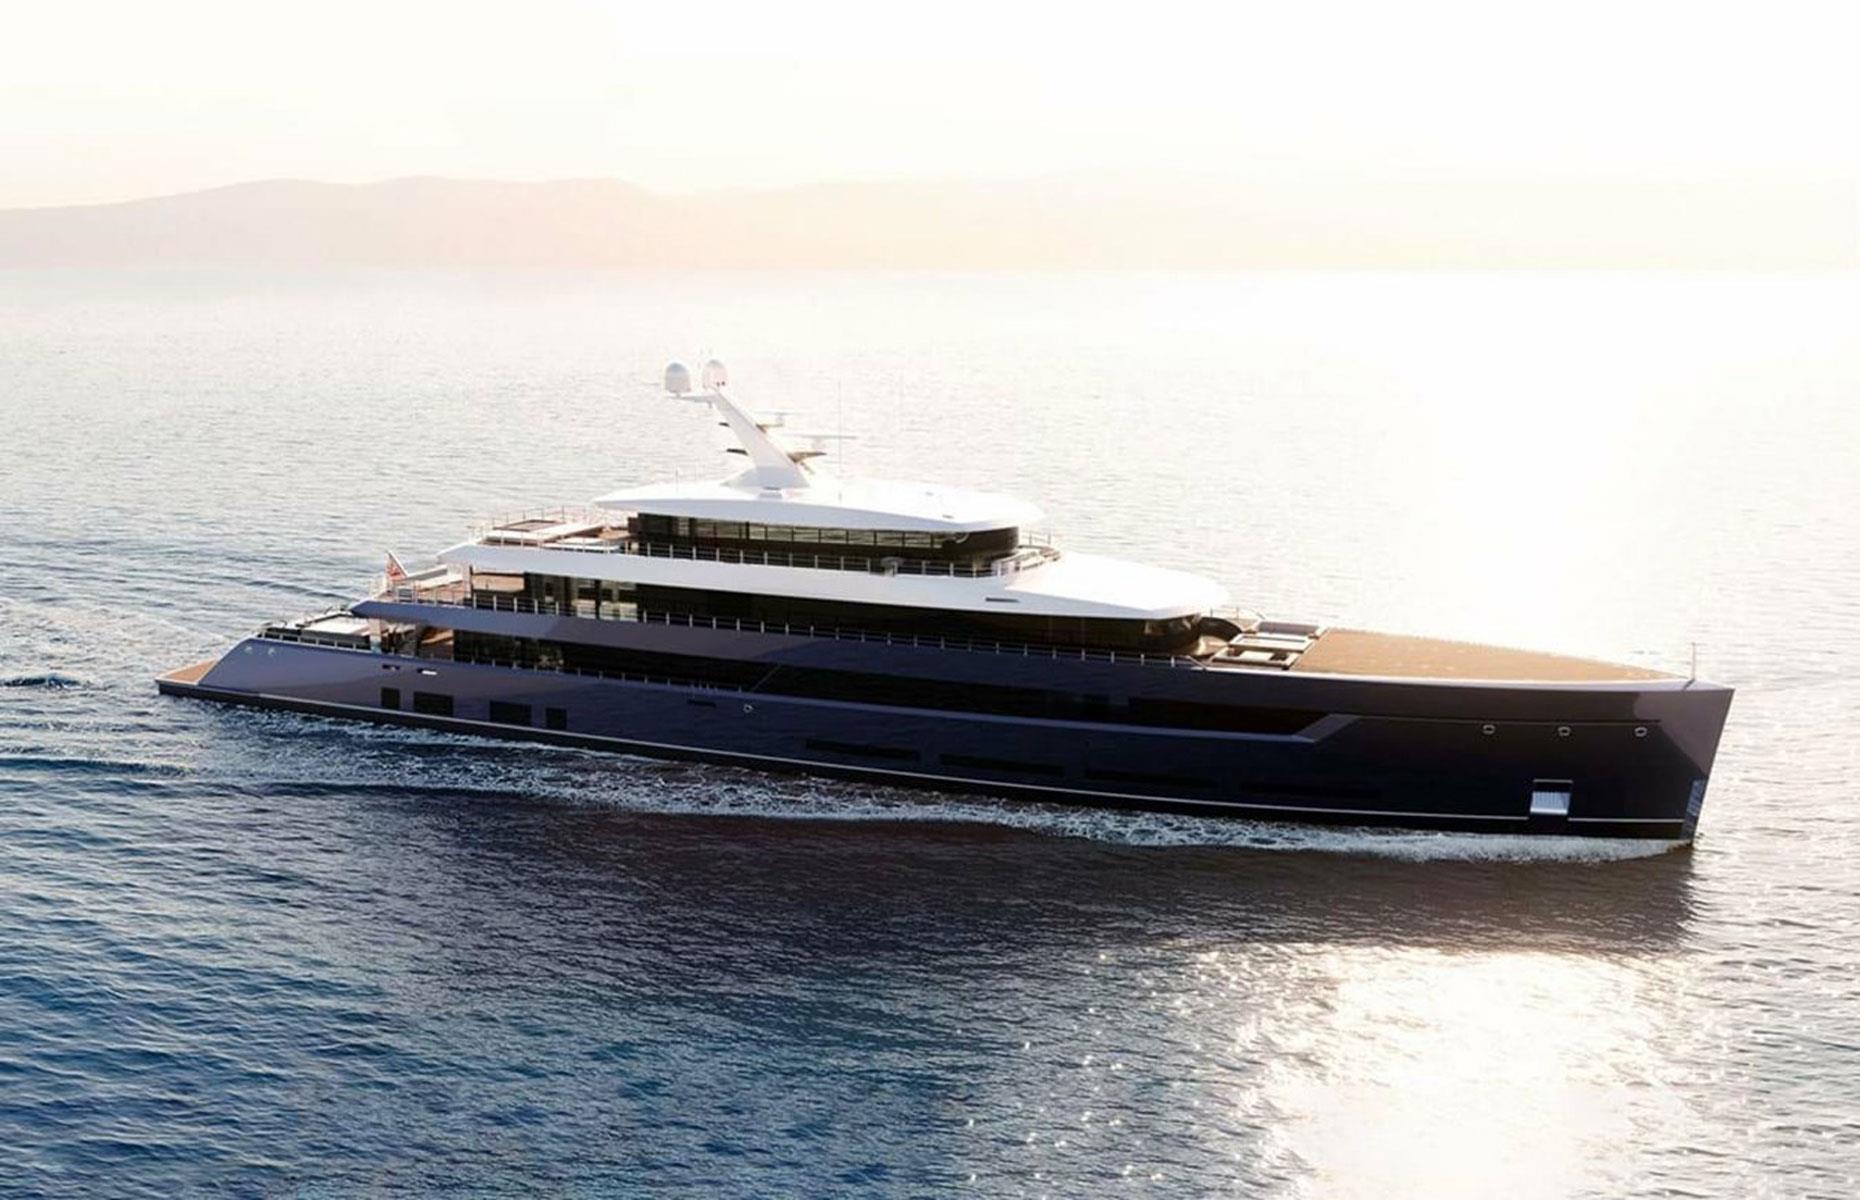 <p>On the other hand, the asking price for Feadship's <em>Project 825 </em><em>has</em> been revealed.</p>  <p>Due for delivery later in the year, the 249-foot (76m) superyacht is currently available for $186 million (£146m) via Burgess Yachts.</p>  <p>Newly-built vessels of this size and calibre are usually custom orders, so it's rare for one to come on the market. The yacht is likely to be snapped up by a member of the super-rich elite who doesn't have the patience to wait years for a bespoke job<strong>.</strong></p>